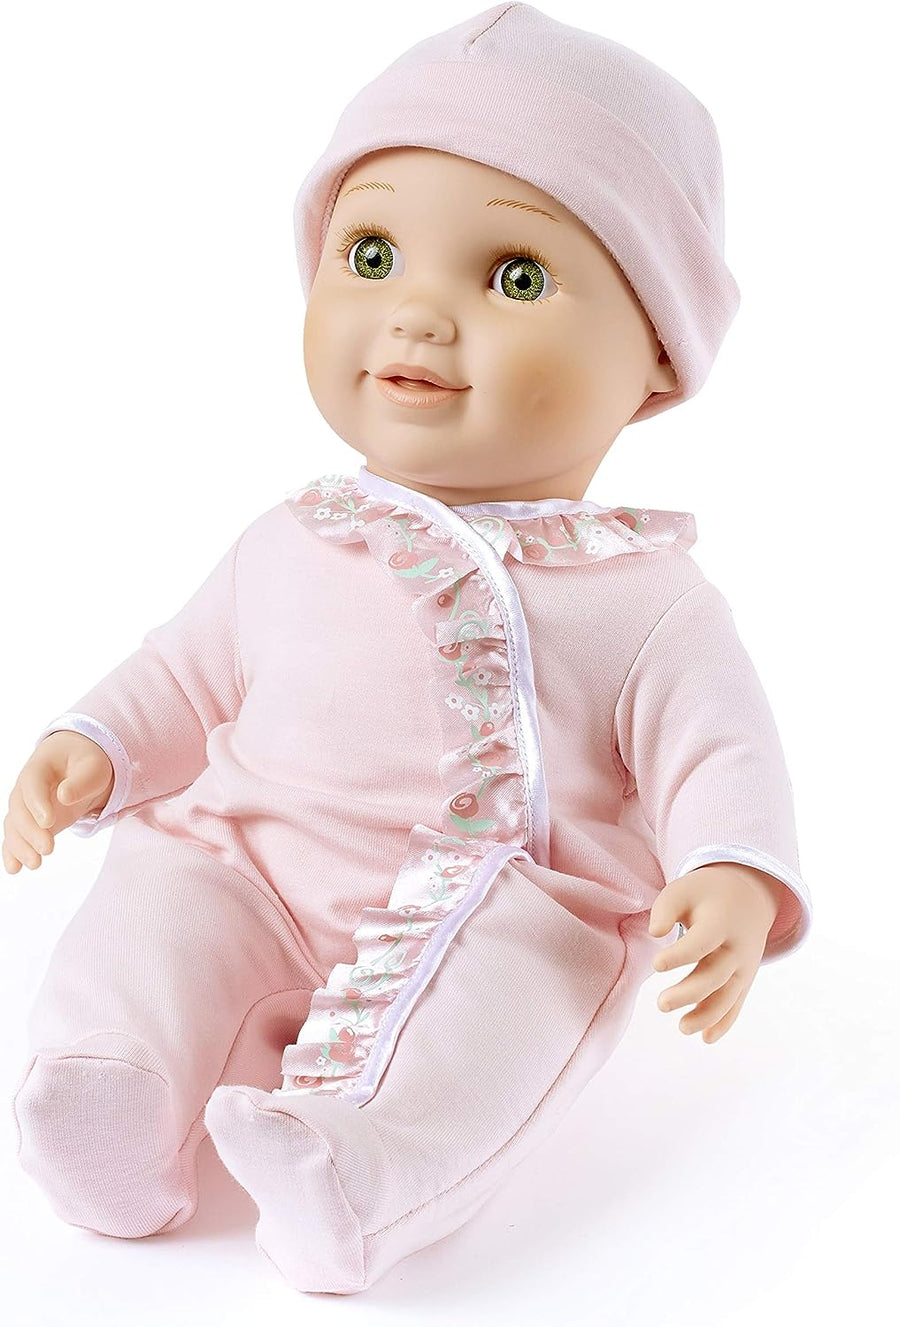 You & Me Baby So Sweet 16-Inch Doll with Clothes, Green Eyes - $15